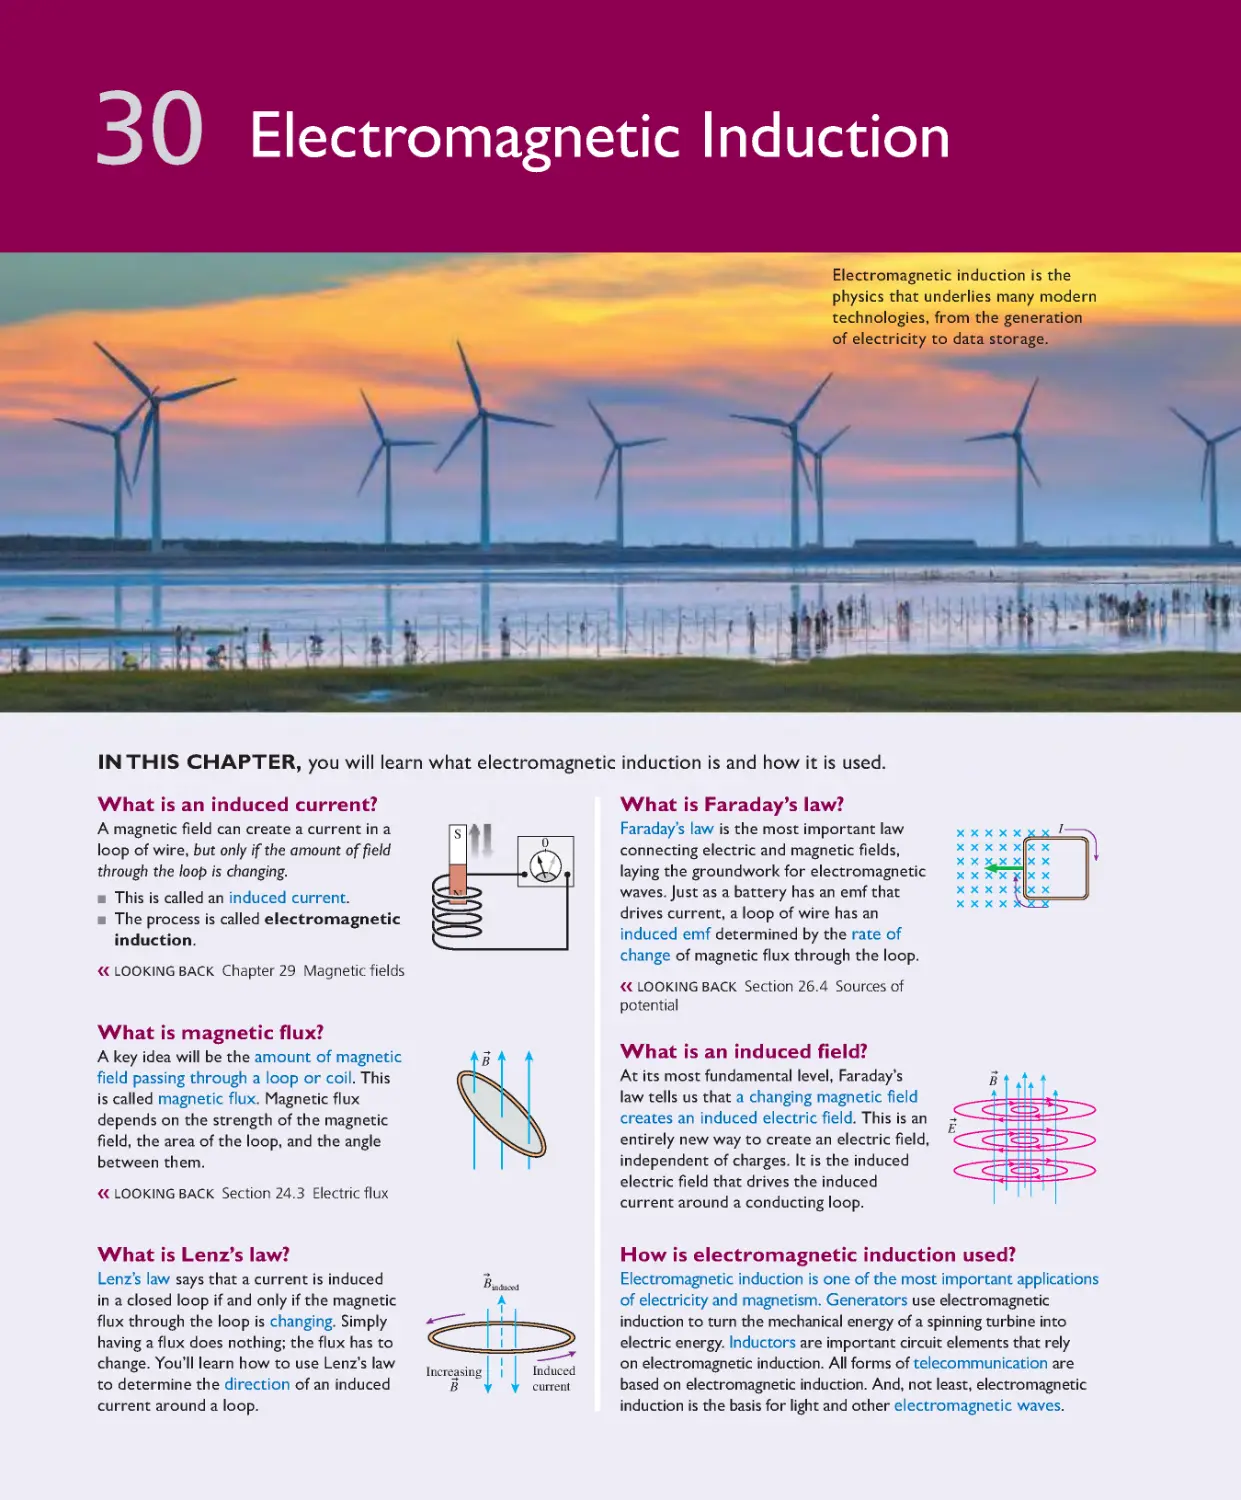 Chapter 30: Electromagnetic Induction